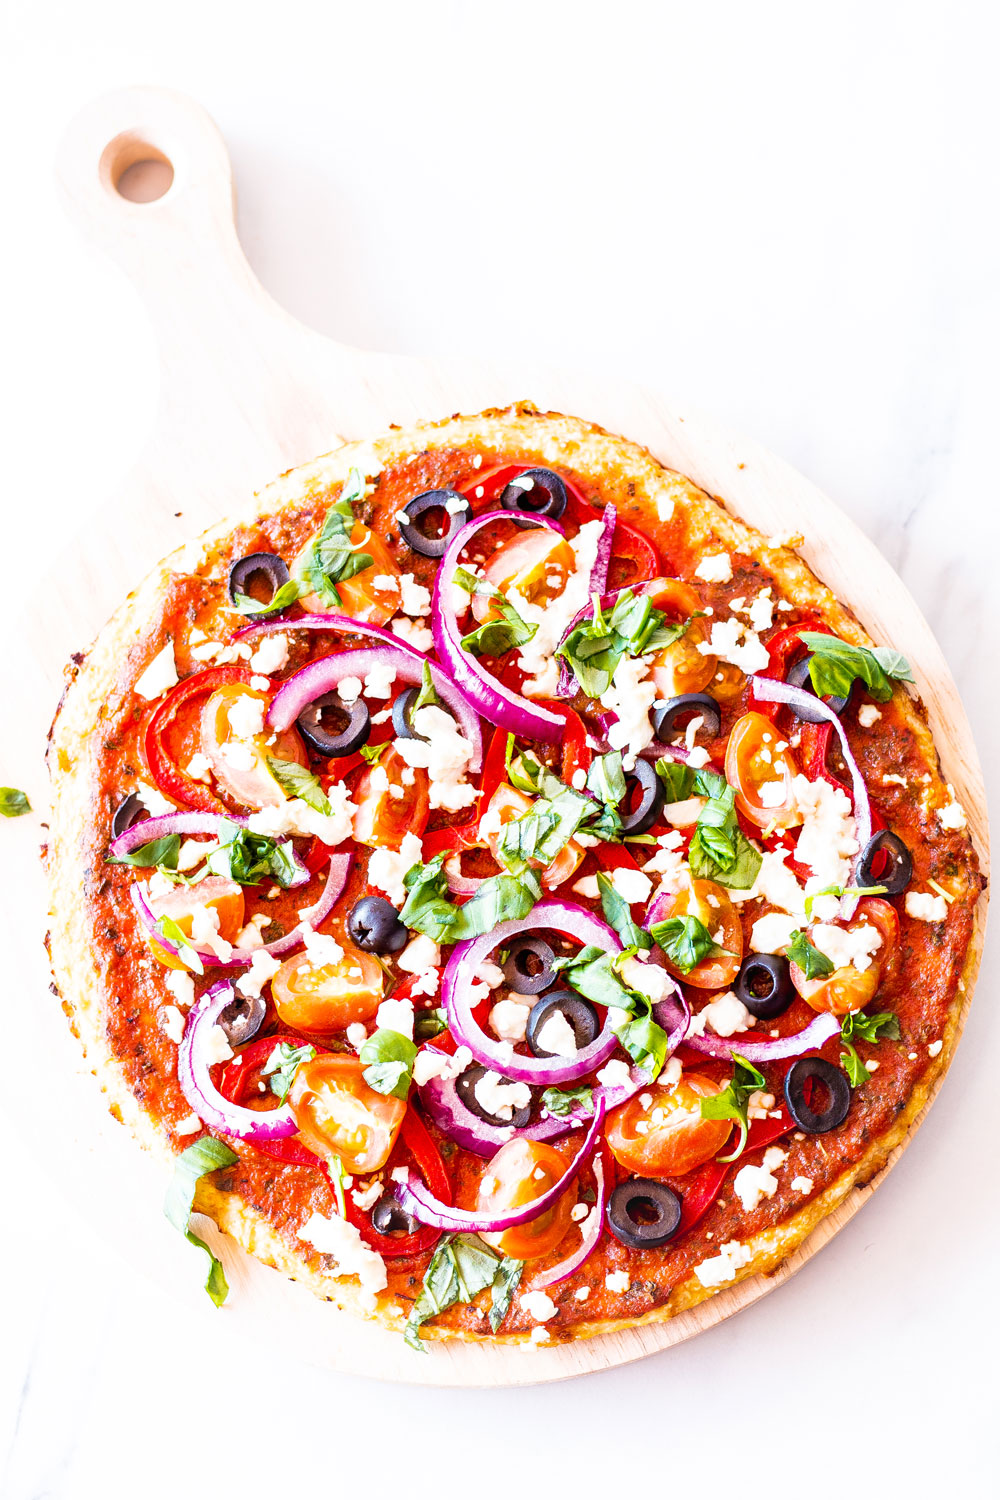 If you enjoy pizza night but are trying to cut down calories or reduce your carb intake, you can replace traditional pizza crust with this cauliflower pizza crust, instead! https://www.spotebi.com/recipes/mediterranean-pizza-cauliflower-crust/